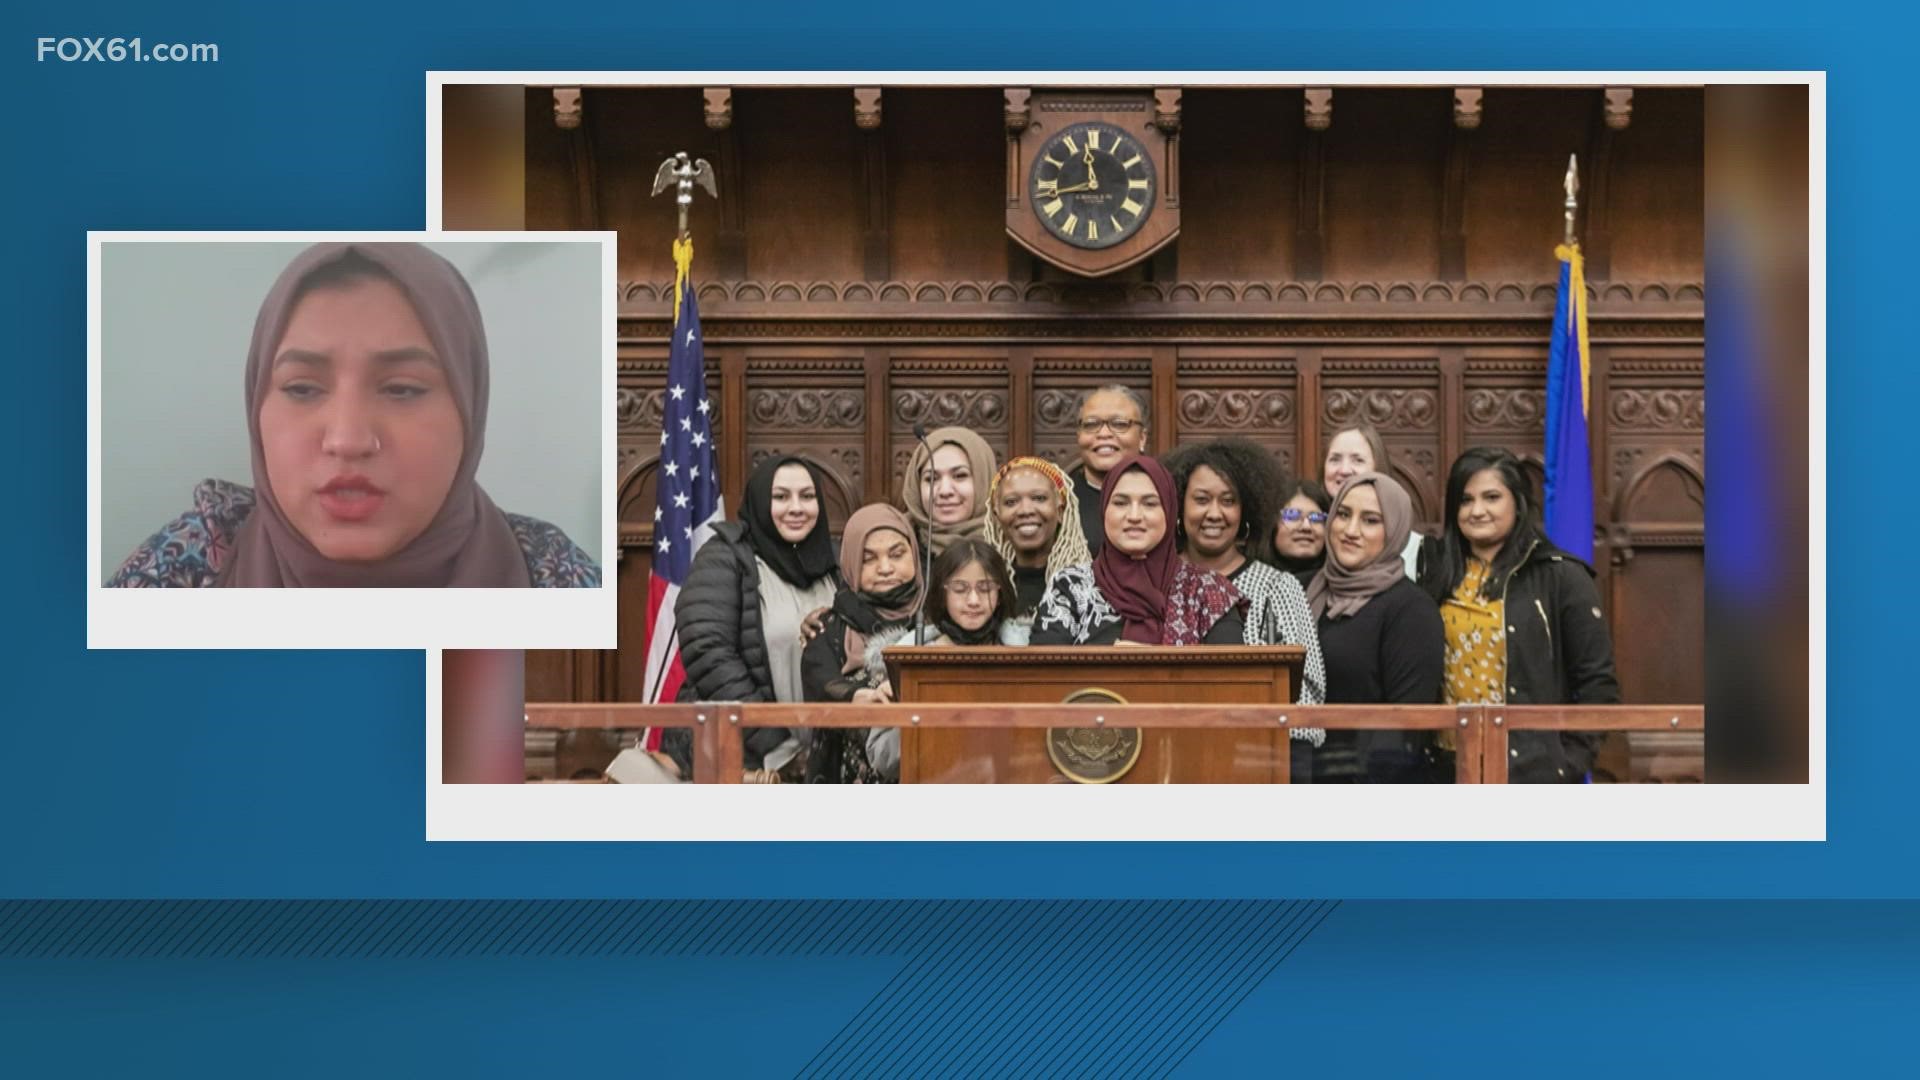 Kahn was sworn in Monday, just in time for International Women's Day. She is the first Muslim member of the Connecticut House.